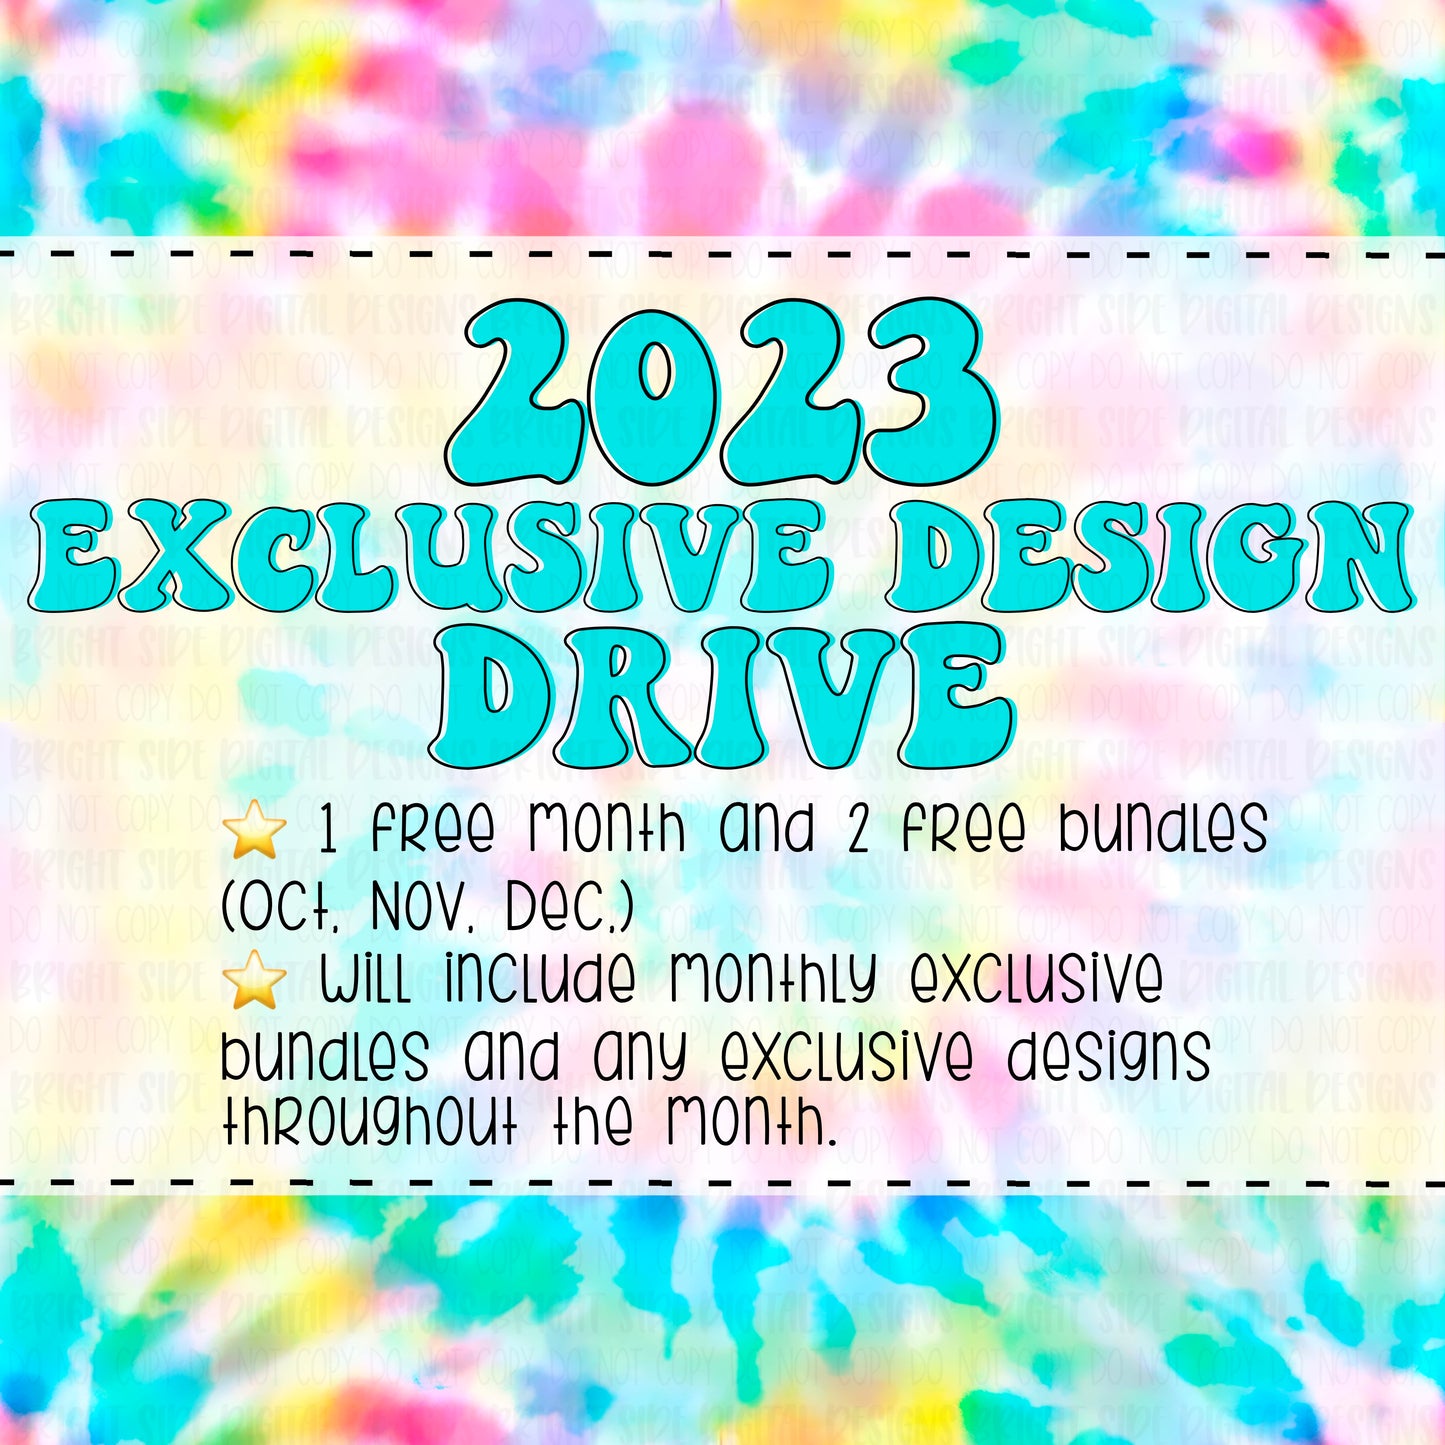 Exclusive Design Drive (choose from yearly or lifetime)